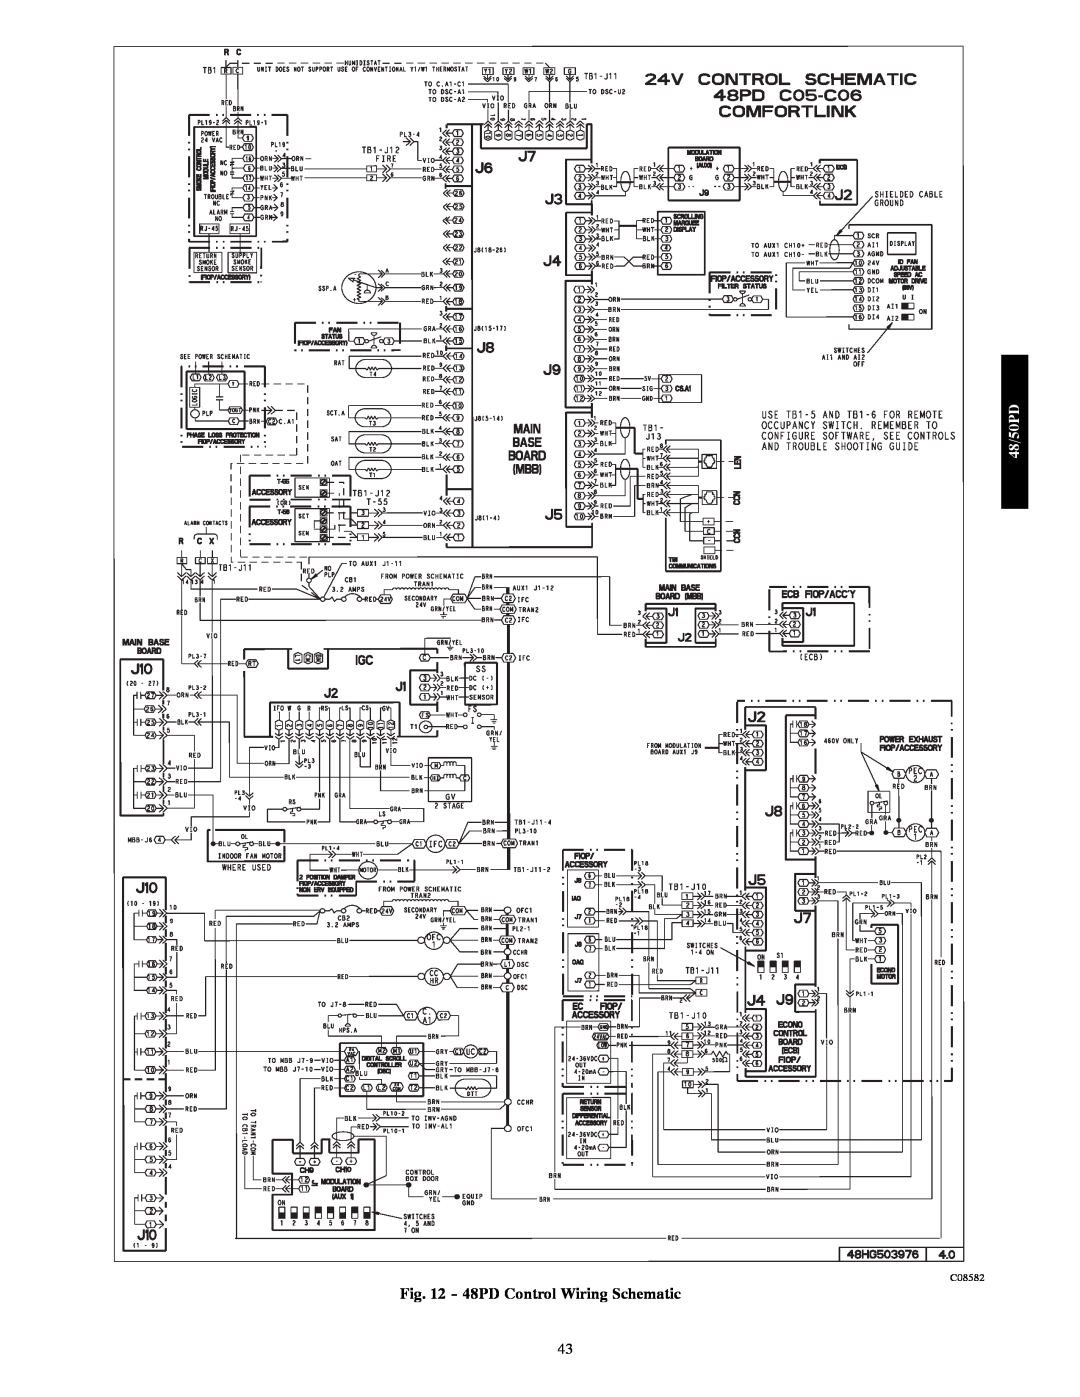 Carrier 48/50PD05 manual 48PD Control Wiring Schematic, C08582 